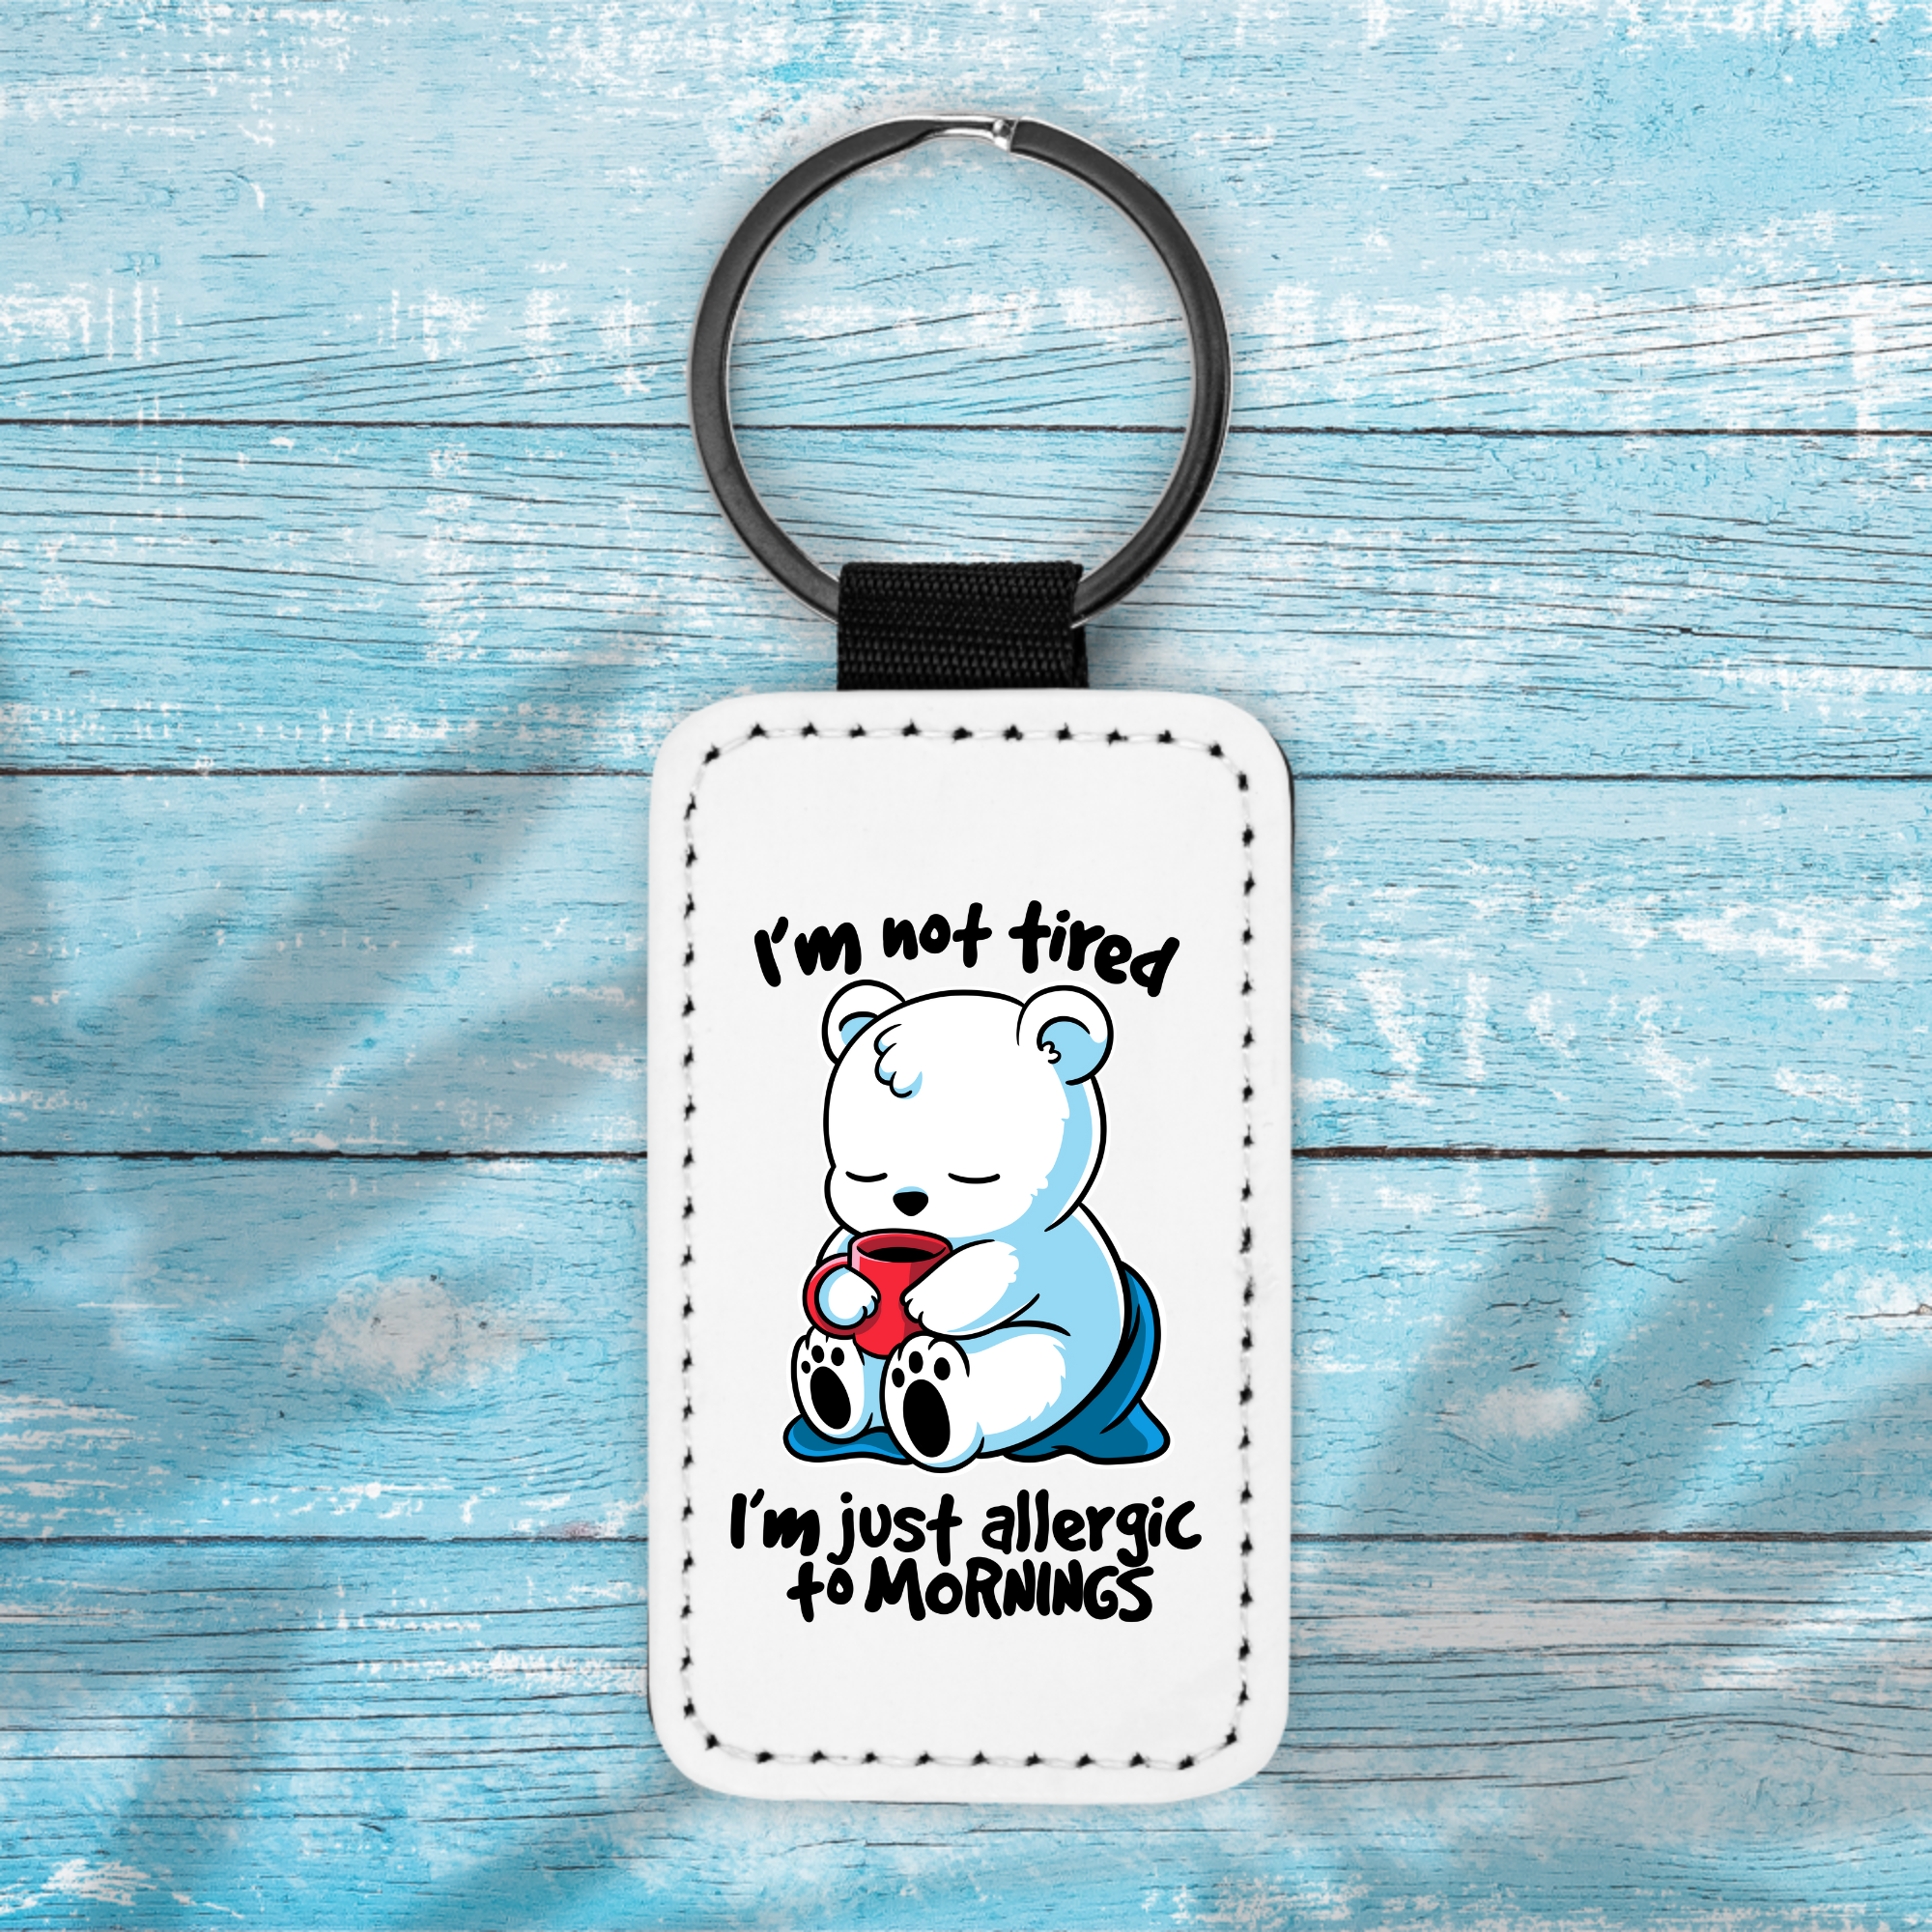 Allergic To Mornings - Key Chain